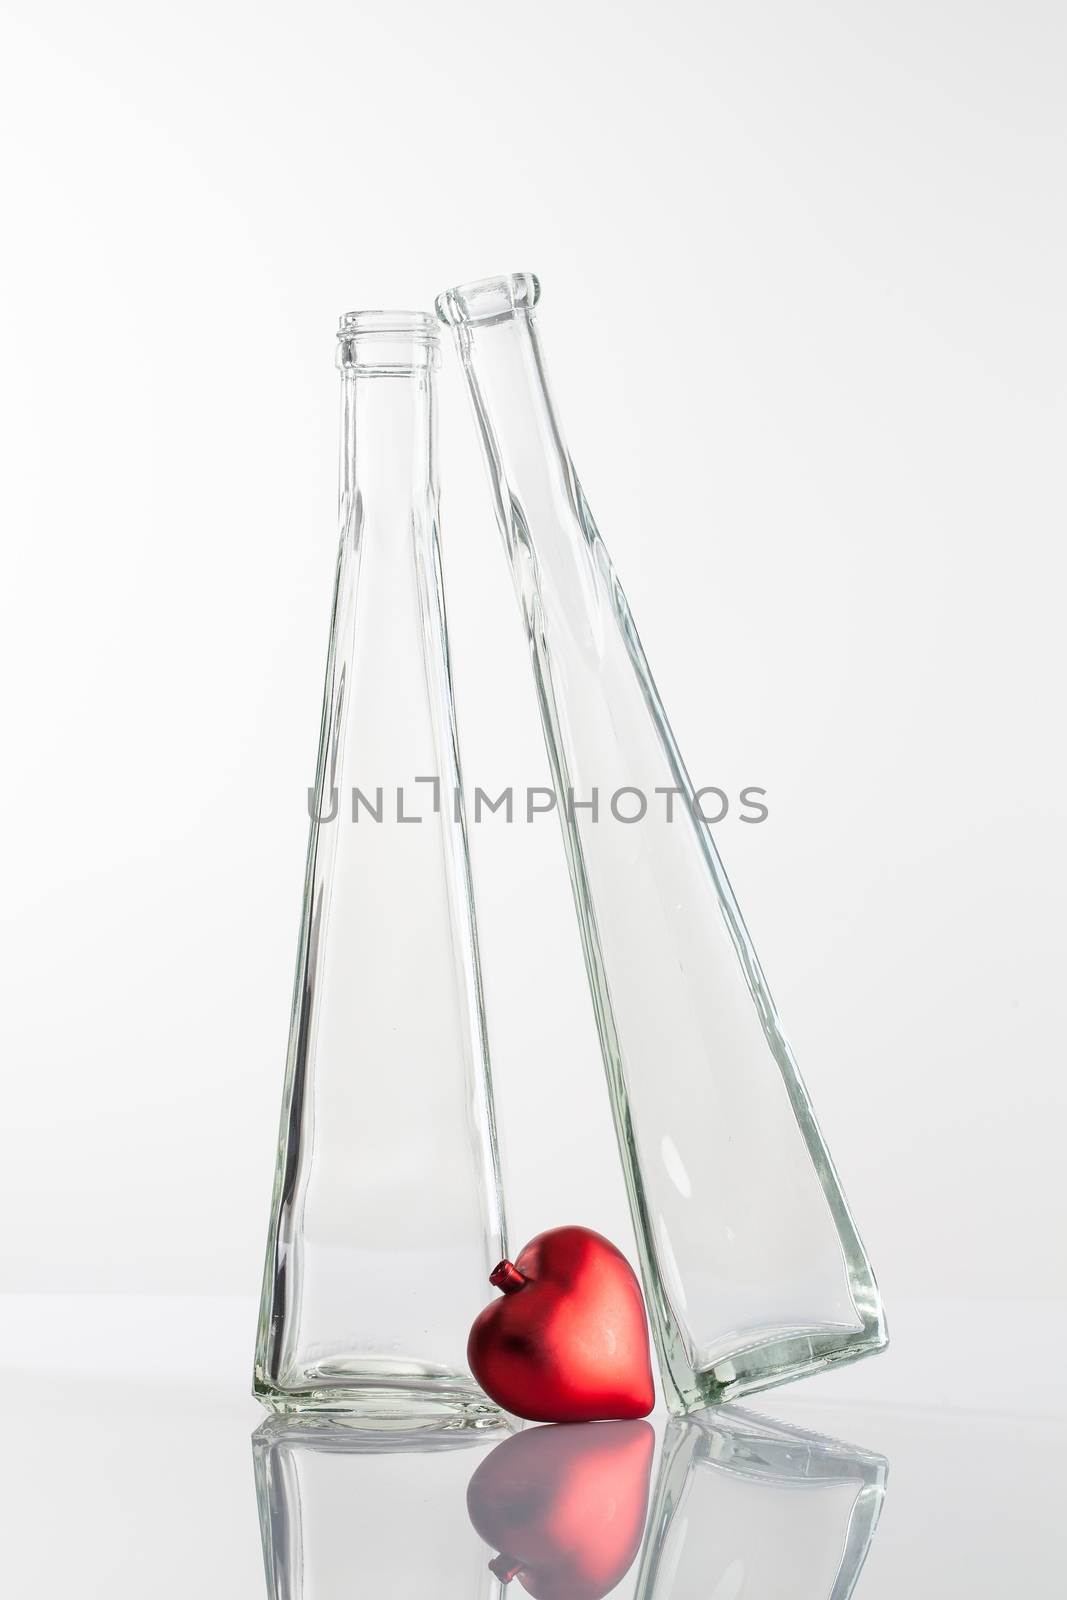 (Couple in Love) Two glasses and red heart on a glass table